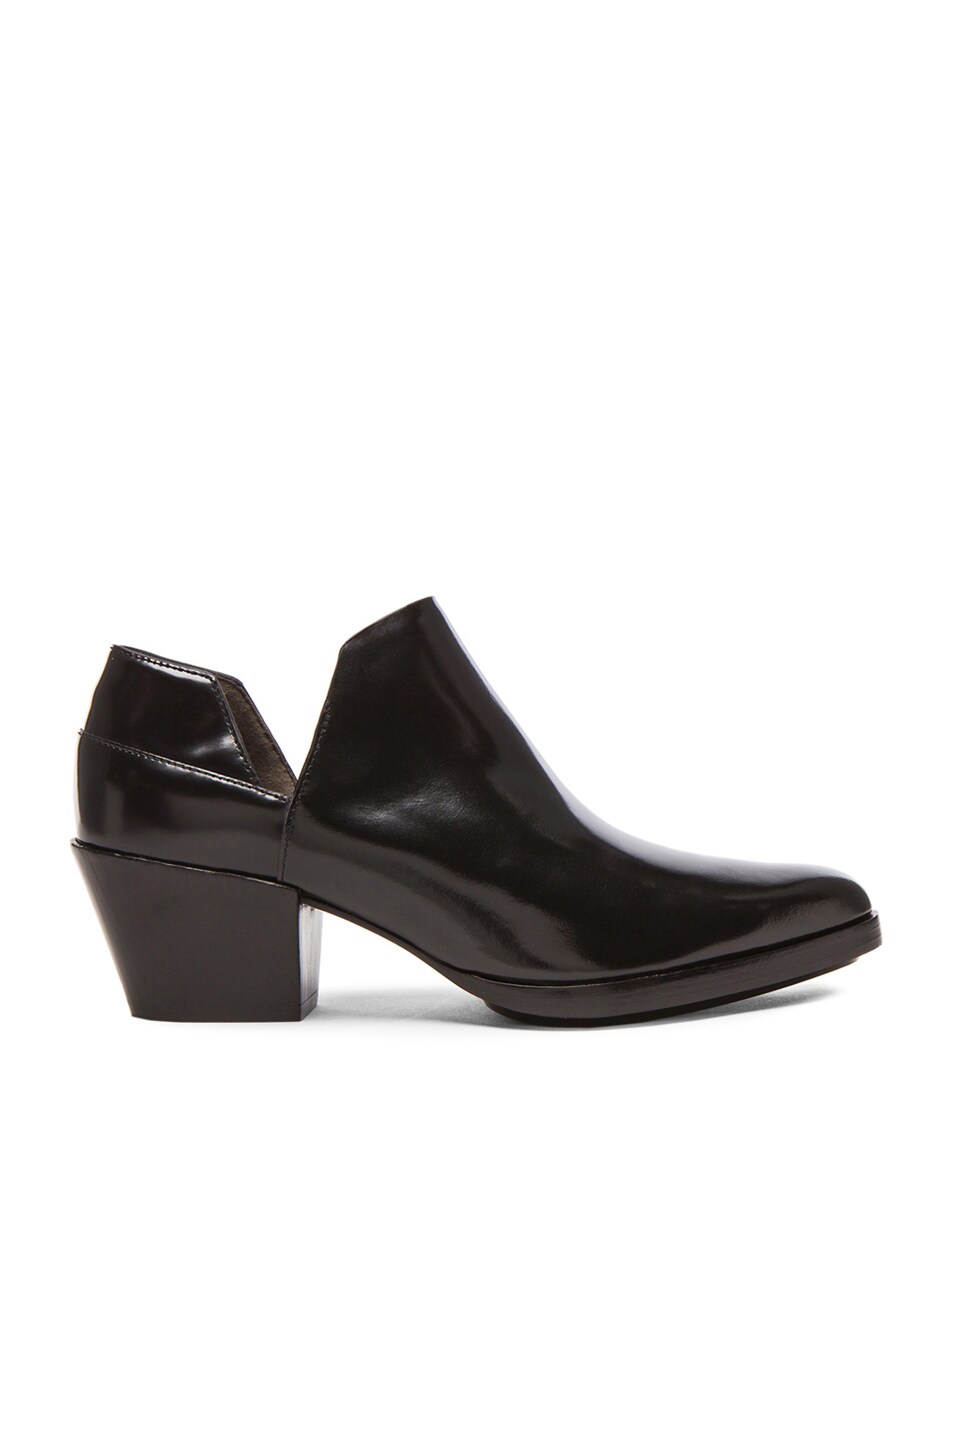 Image 1 of 3.1 phillip lim Dolores Leather Booties in Black